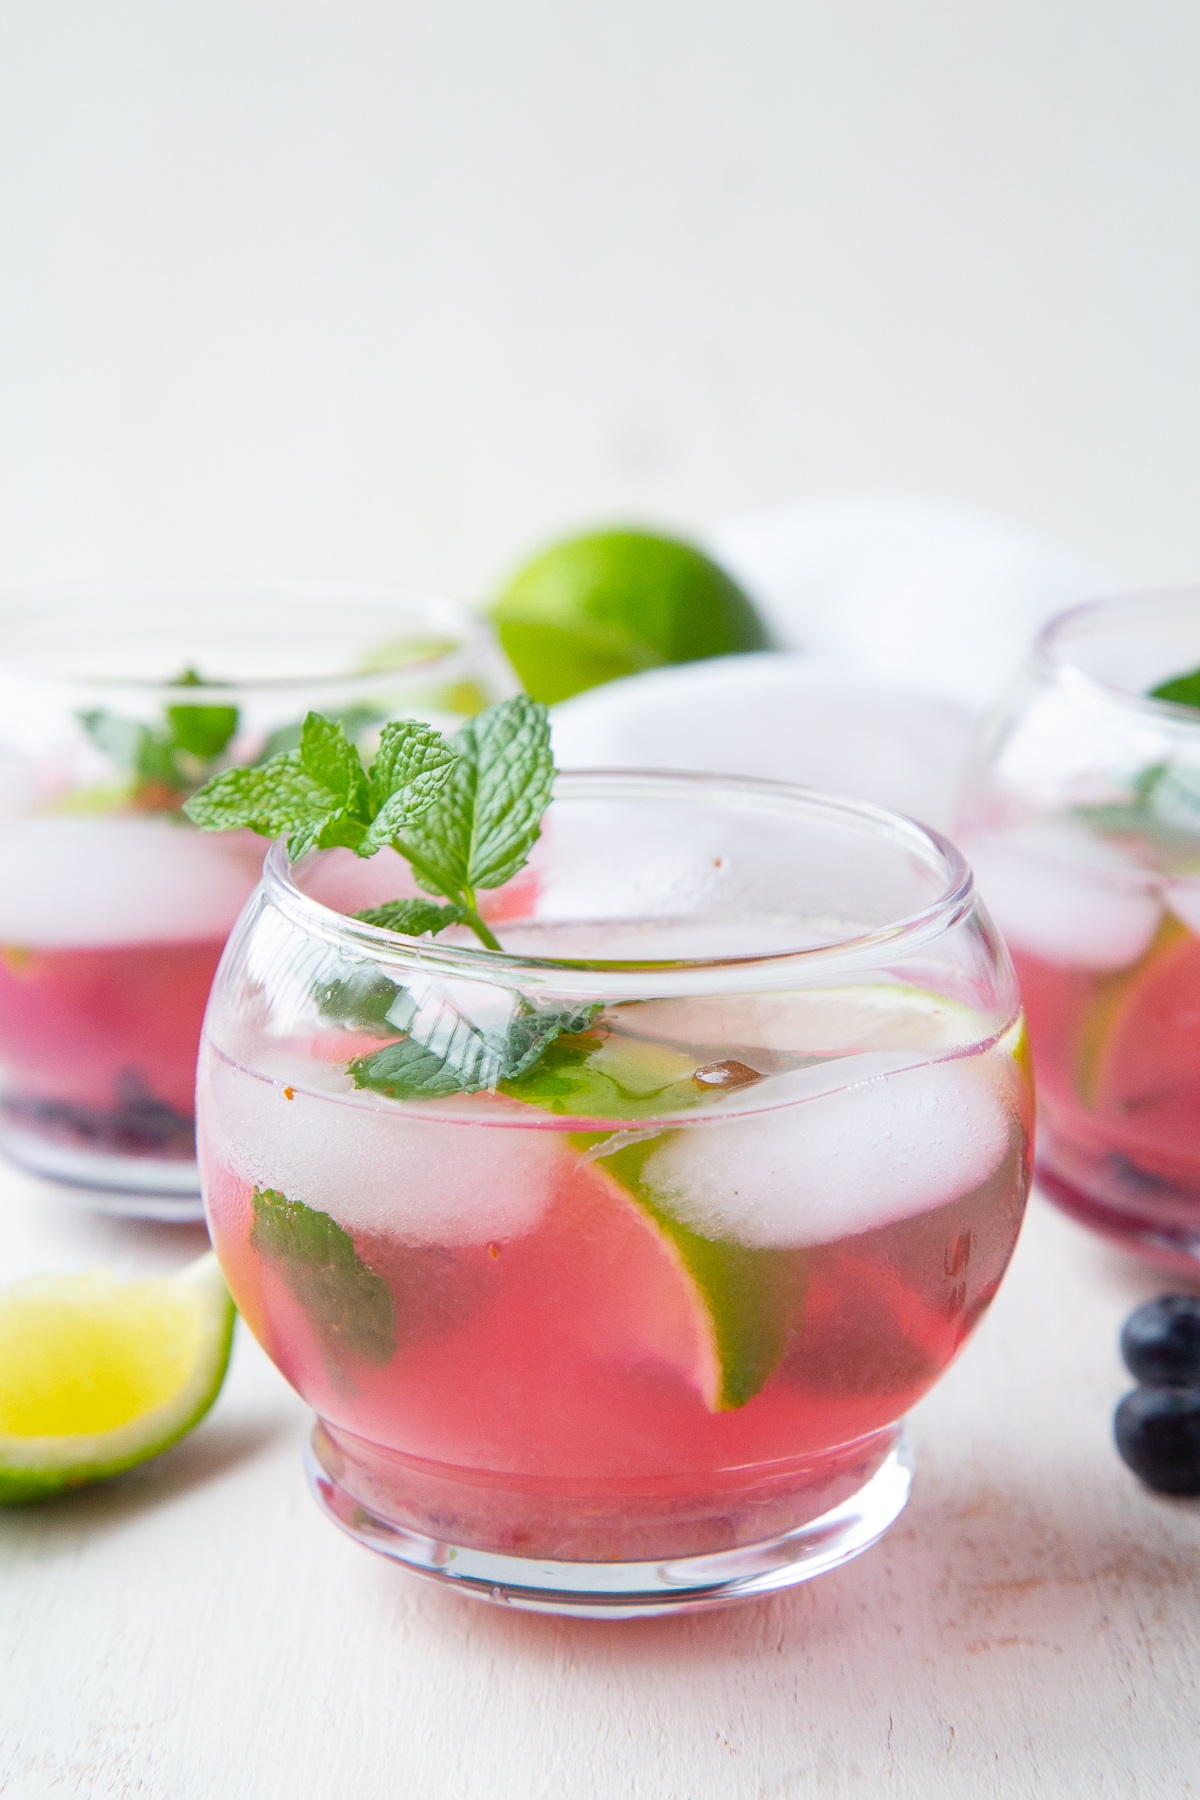 https://www.giftofhospitality.com/wp-content/uploads/2020/07/blueberry-mojito-3.jpg